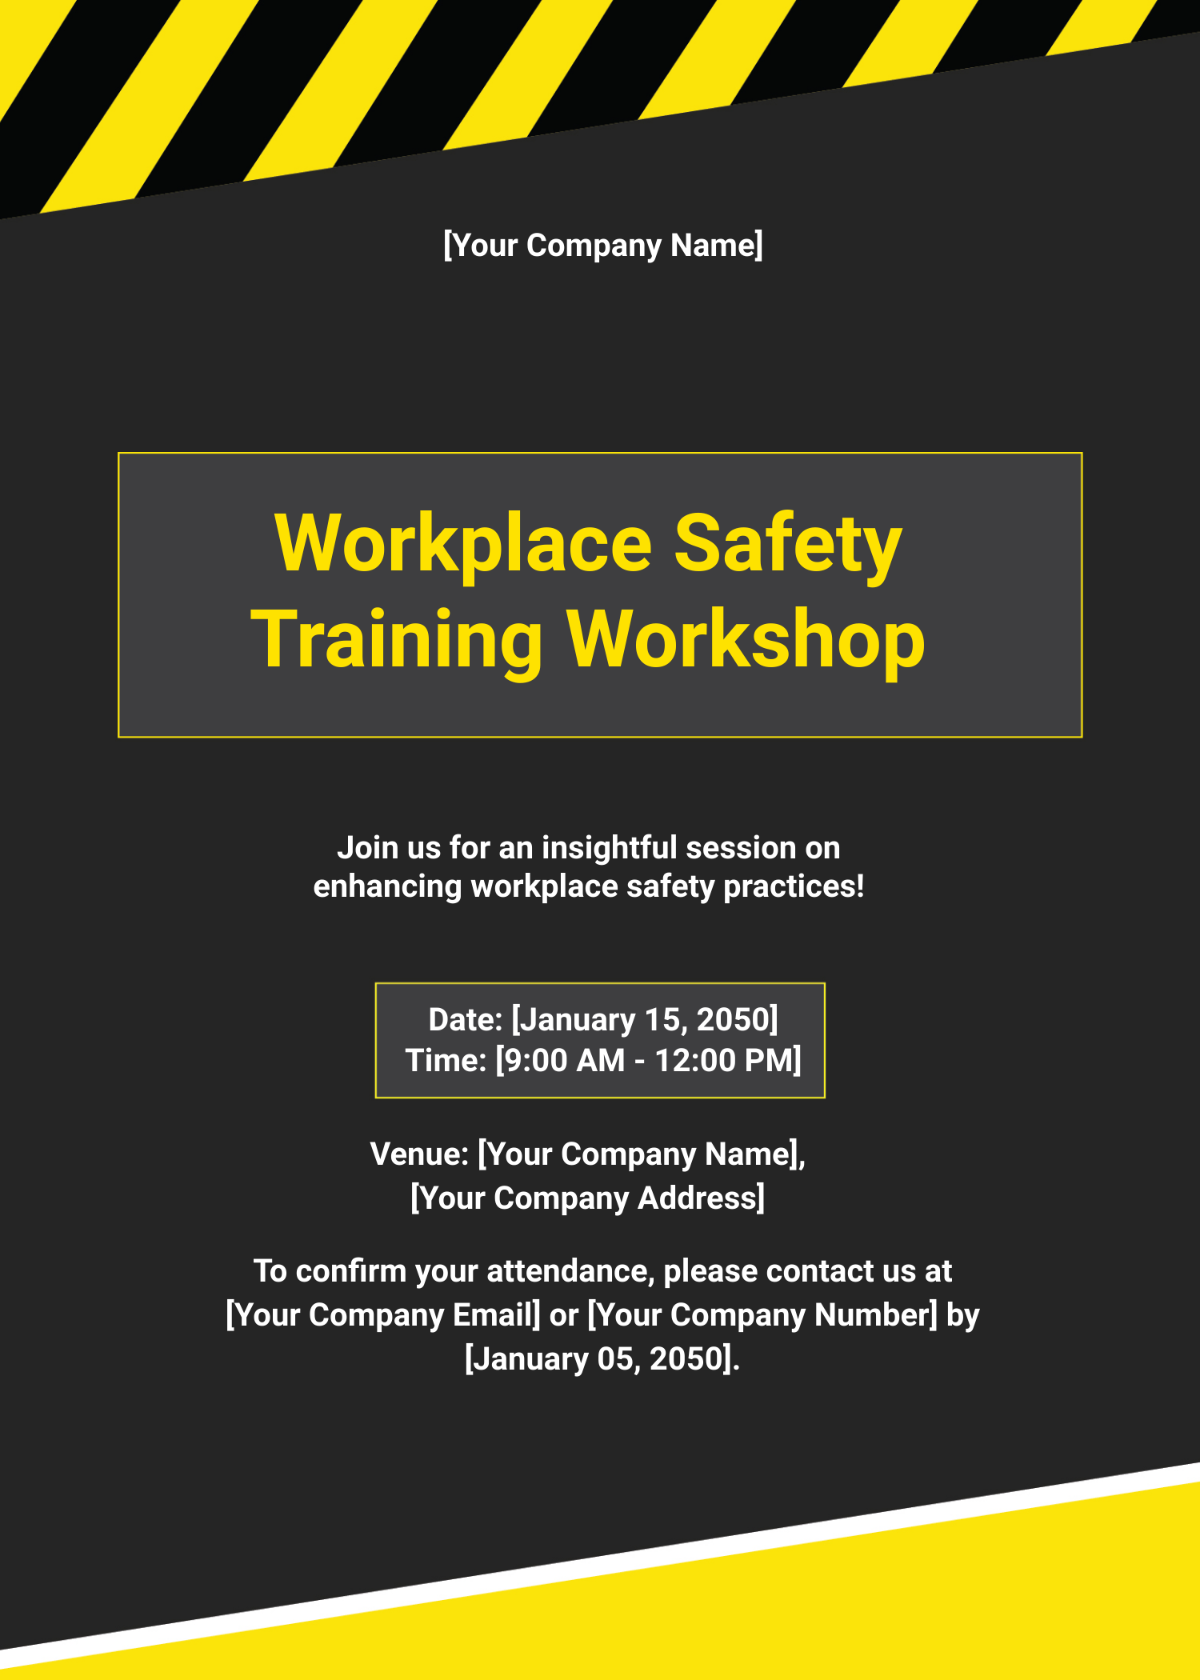 Workplace Safety Training Workshop Invitation Card Template Background